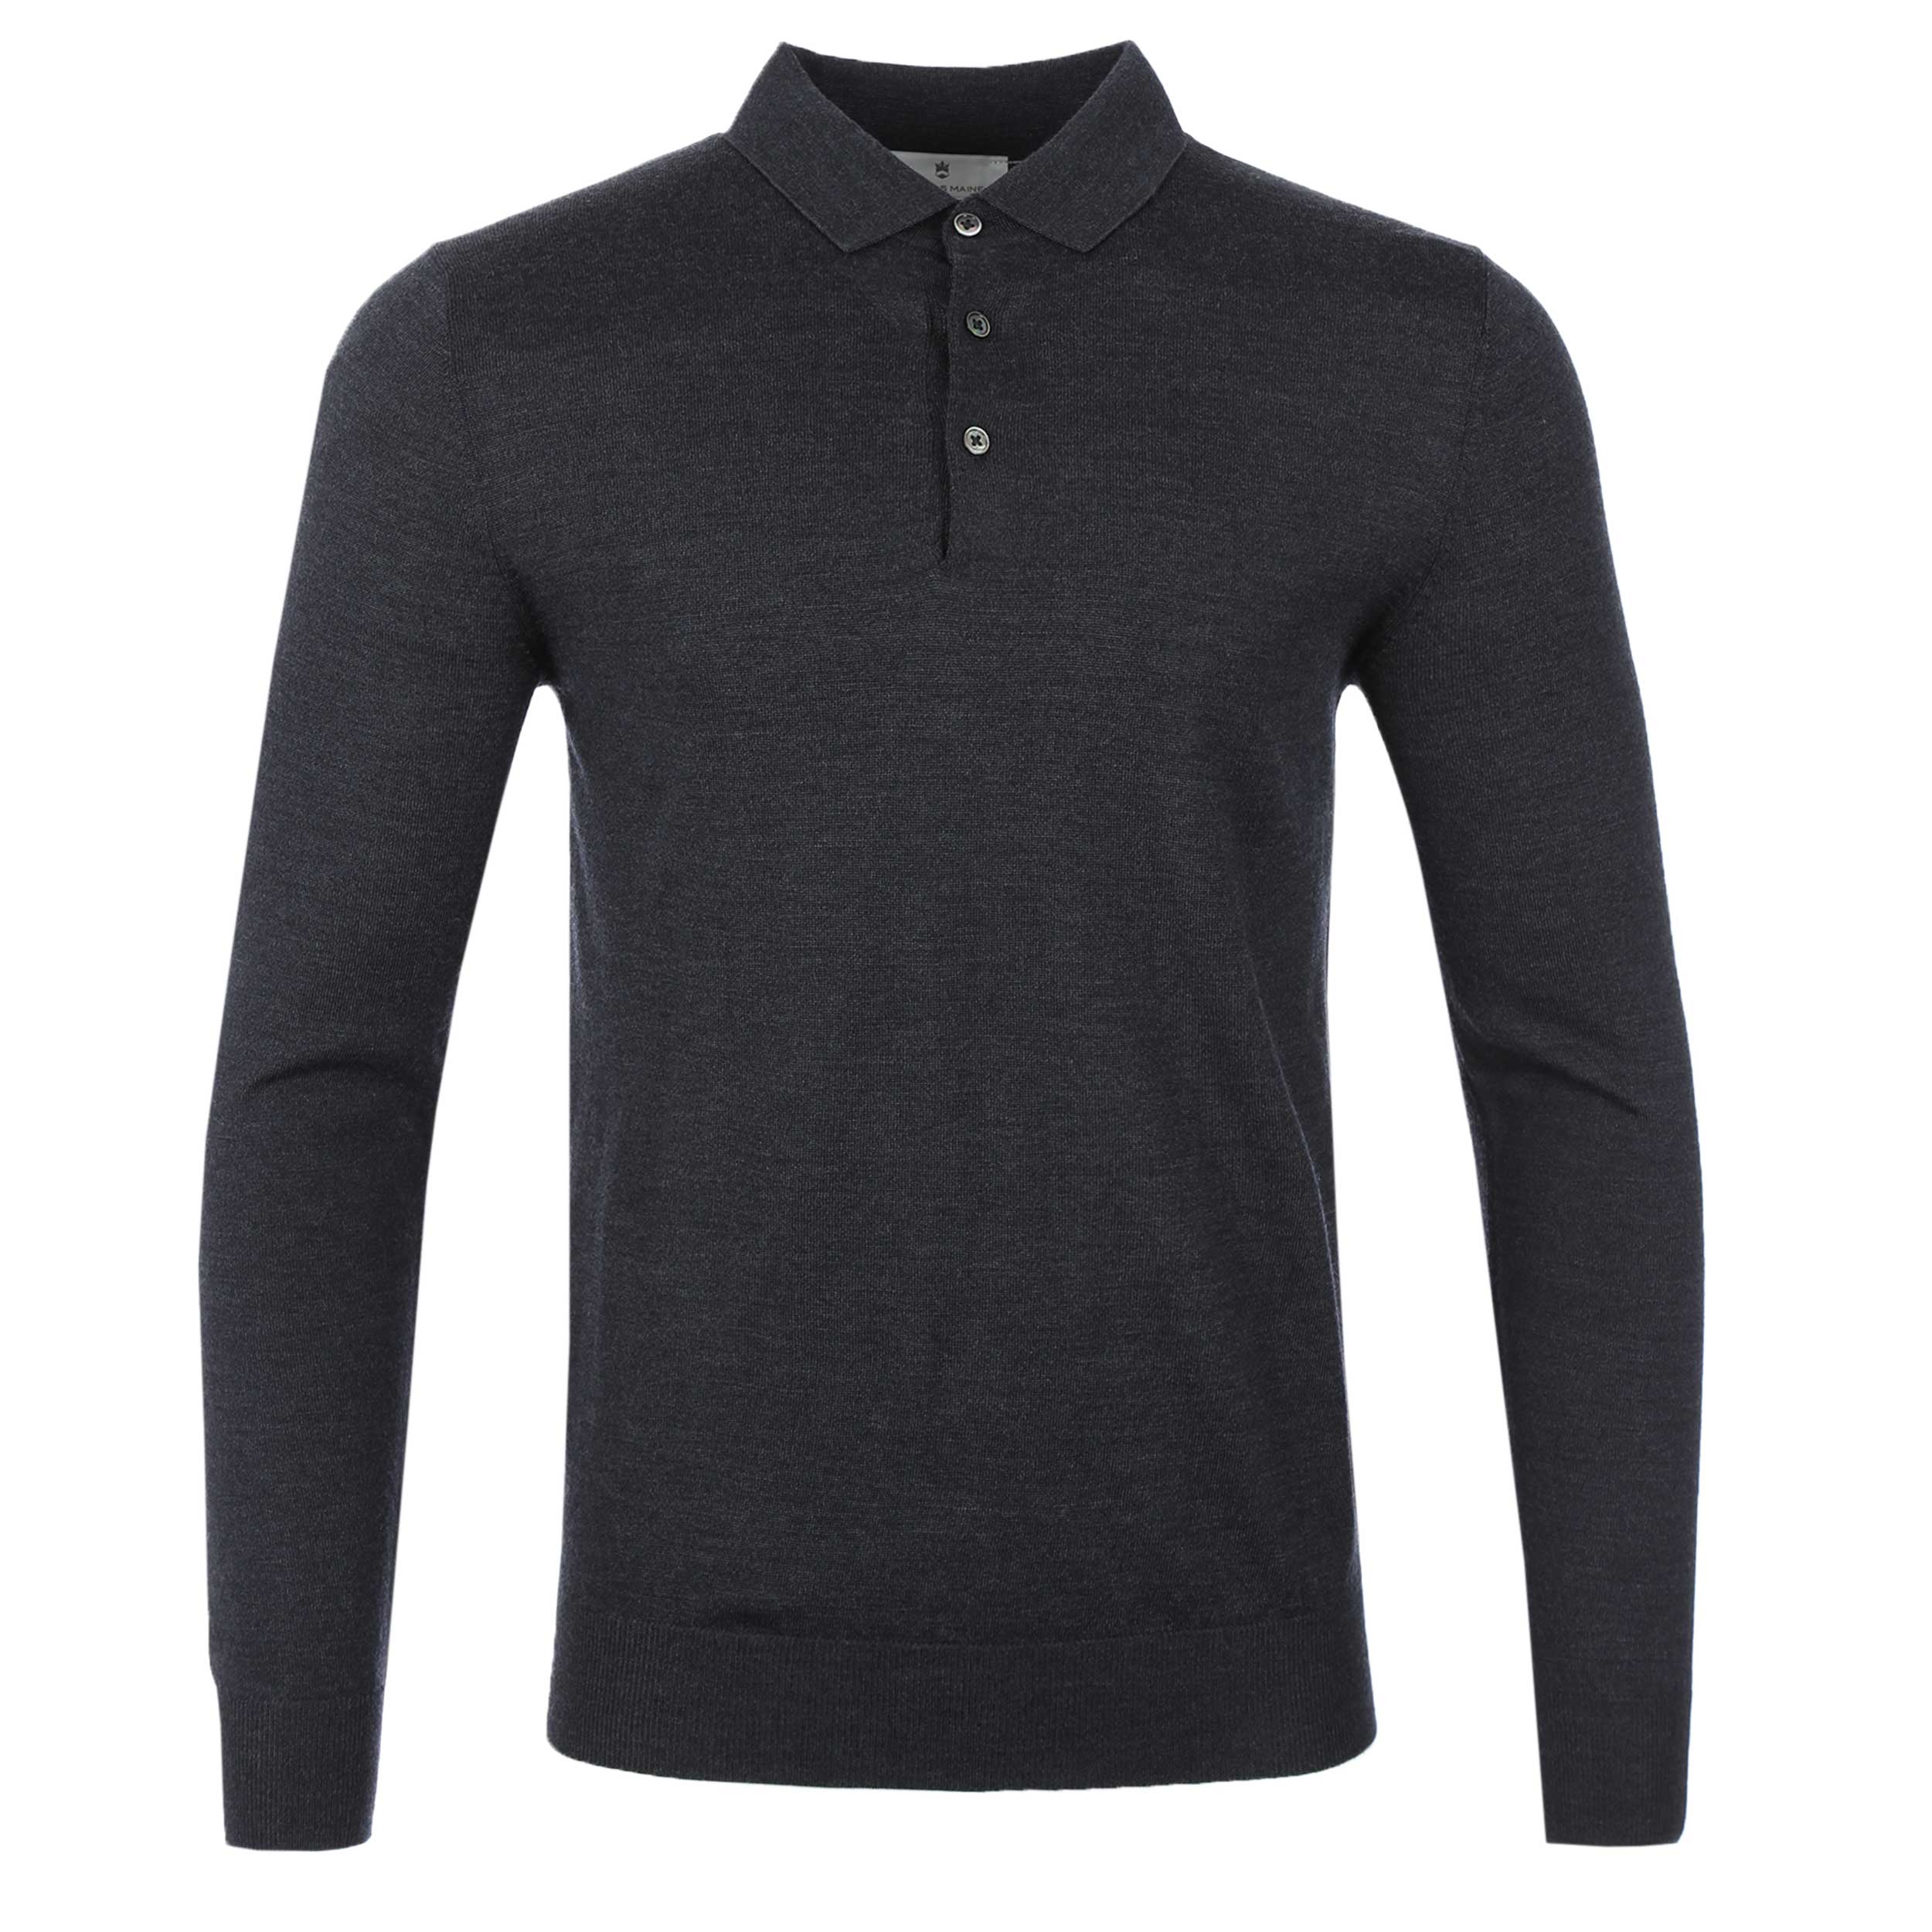 Thomas Maine 3 Button Knit Polo Shirt in Charcoal